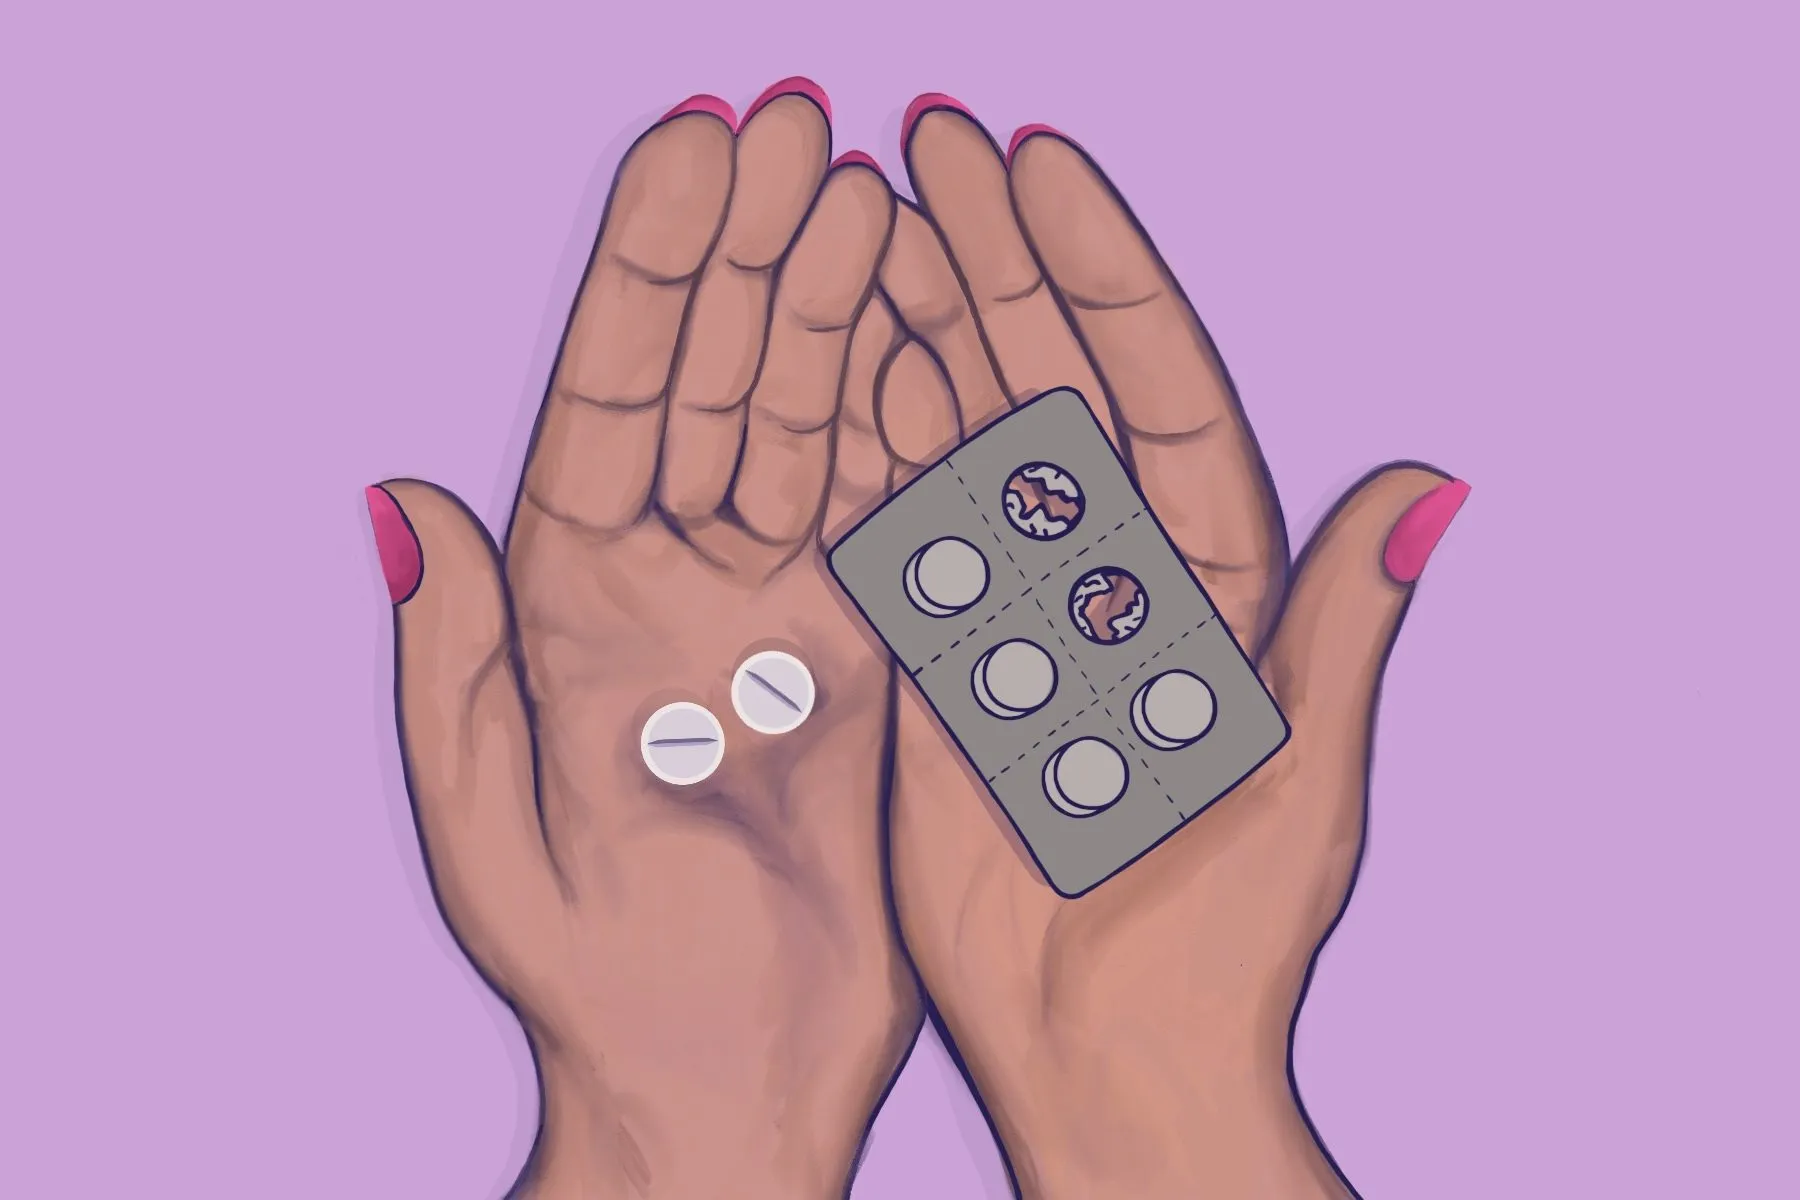 Medication abortion is safe, but pain and recovery are different for everyone pic